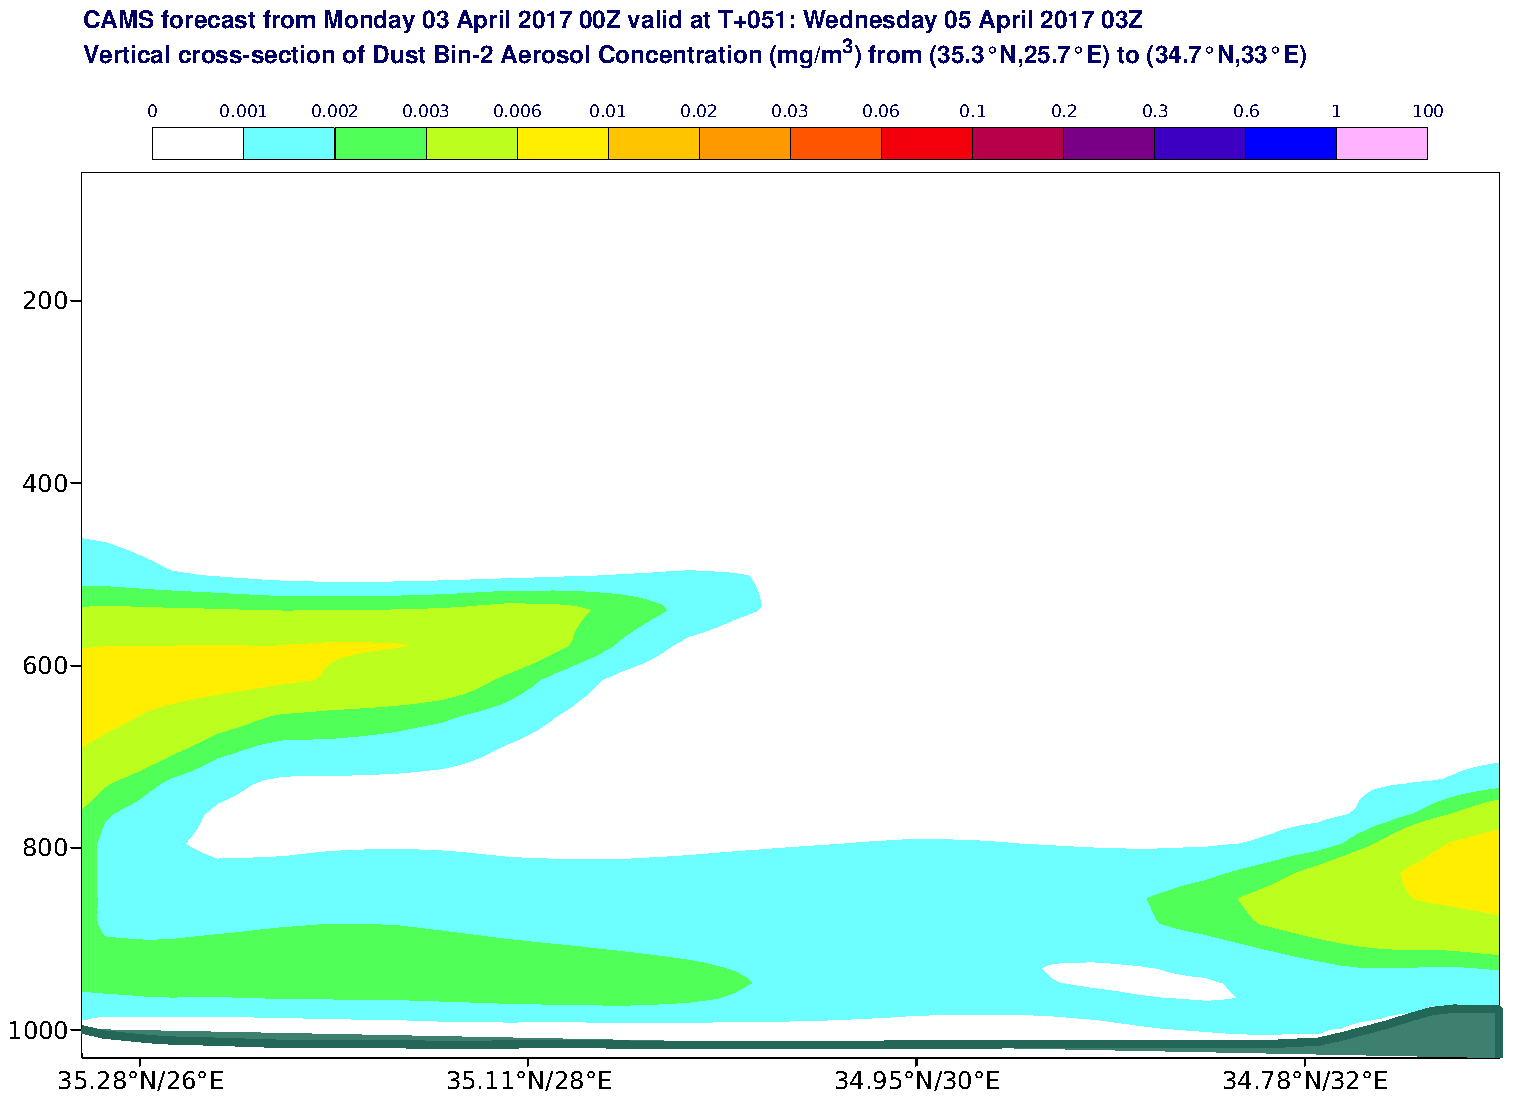 Vertical cross-section of Dust Bin-2 Aerosol Concentration (mg/m3) valid at T51 - 2017-04-05 03:00